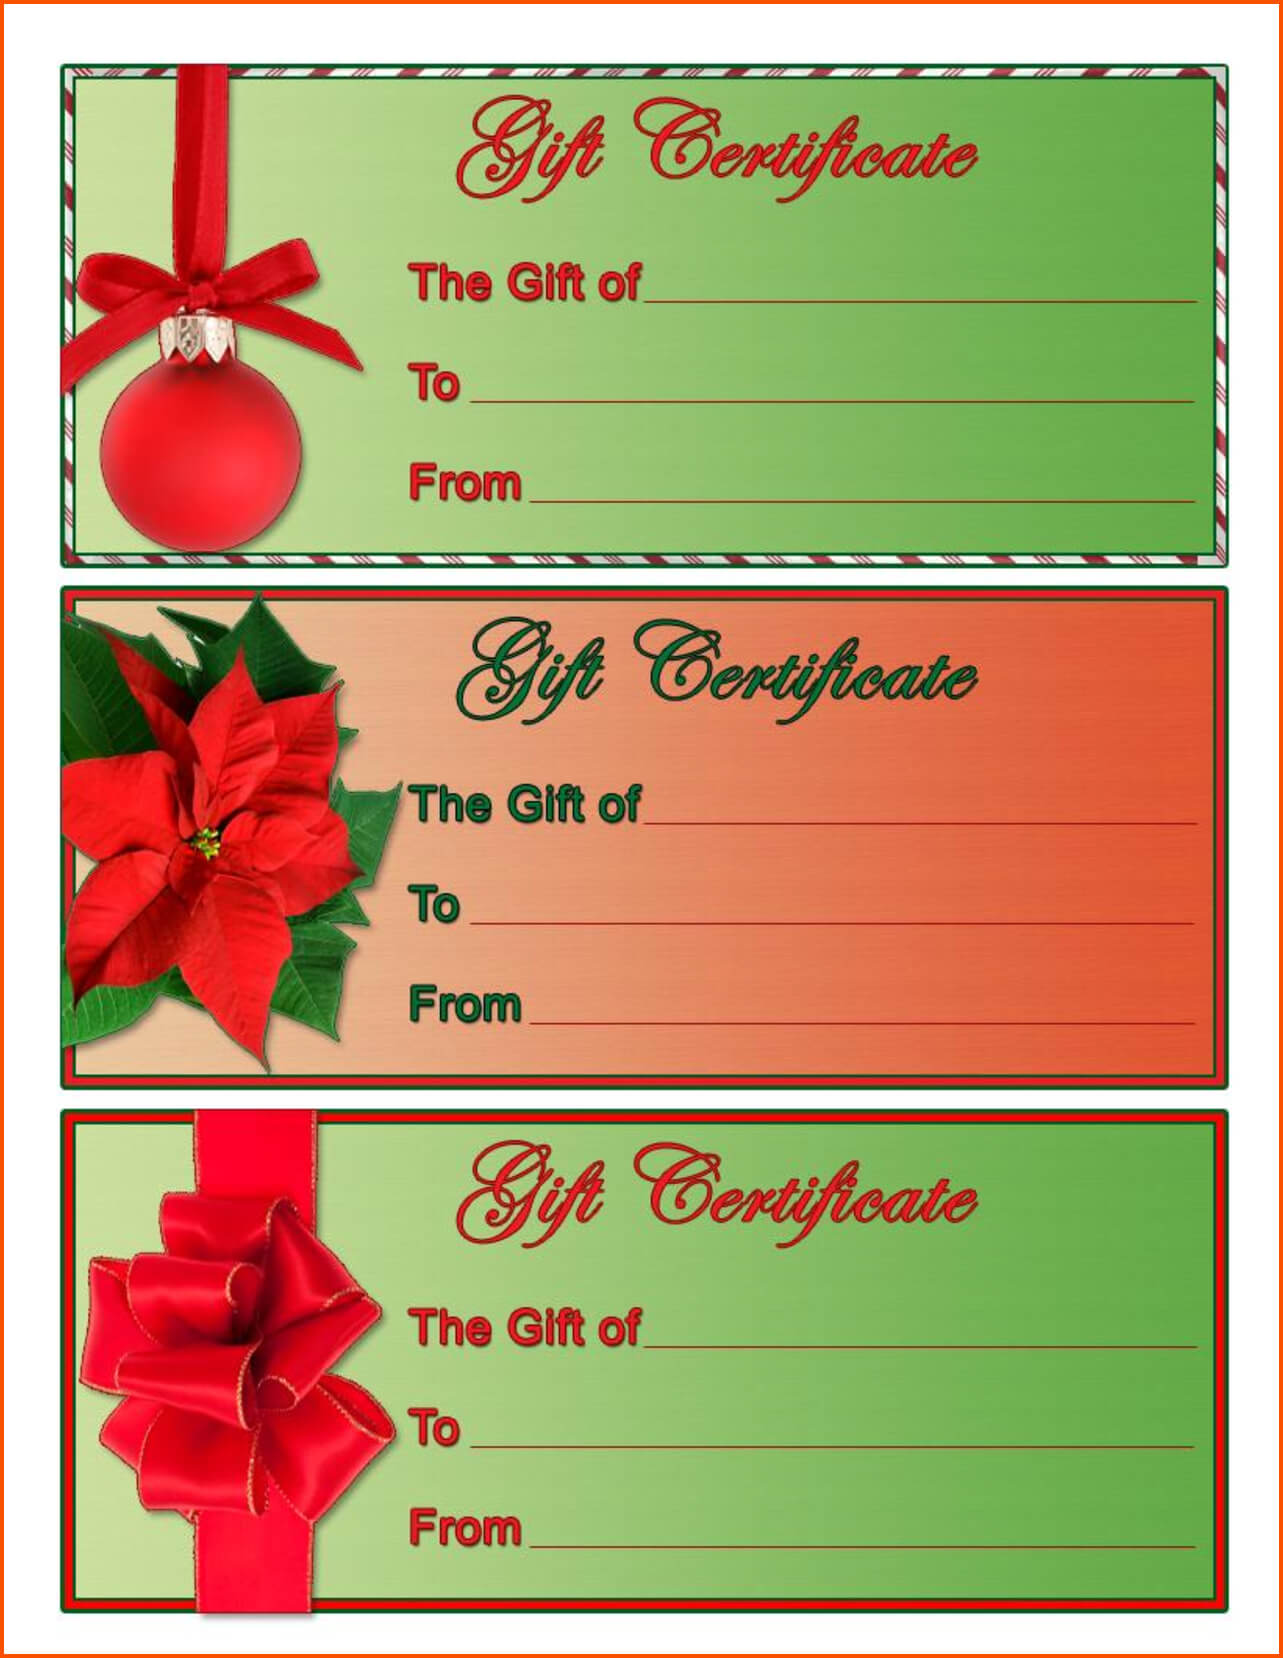 4 Christmas Gift Certificate Template Free Download | Survey Throughout Free Christmas Gift Certificate Templates